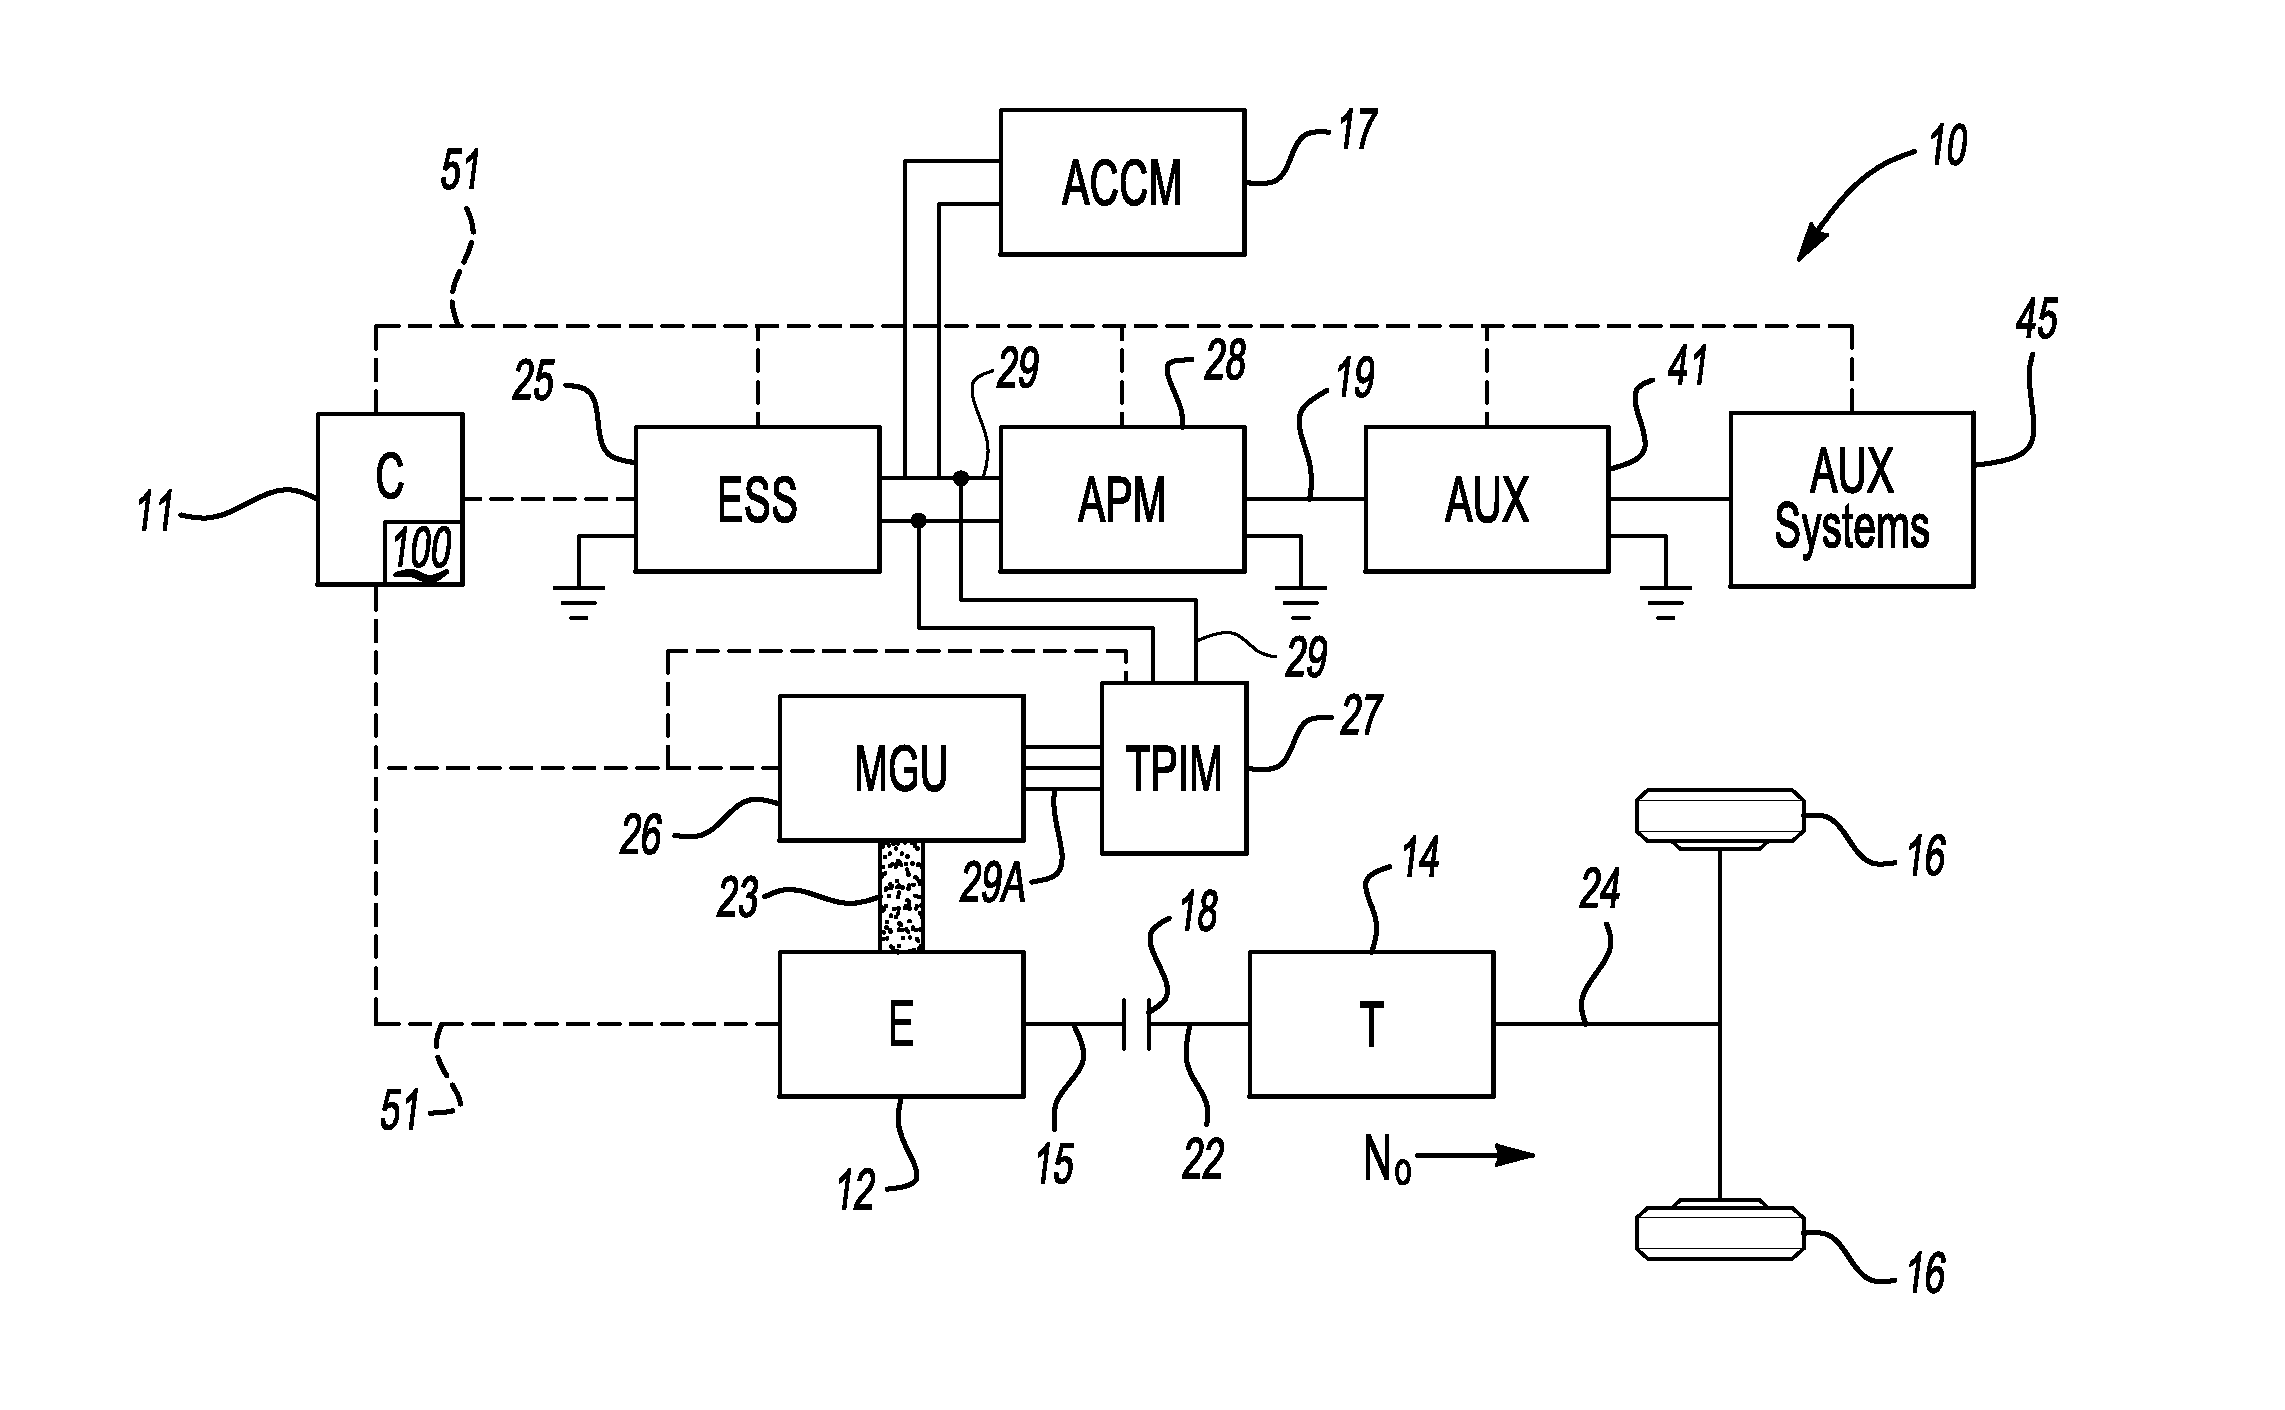 Method and apparatus for avoiding electrical resonance in a vehicle having a shared high-voltage bus